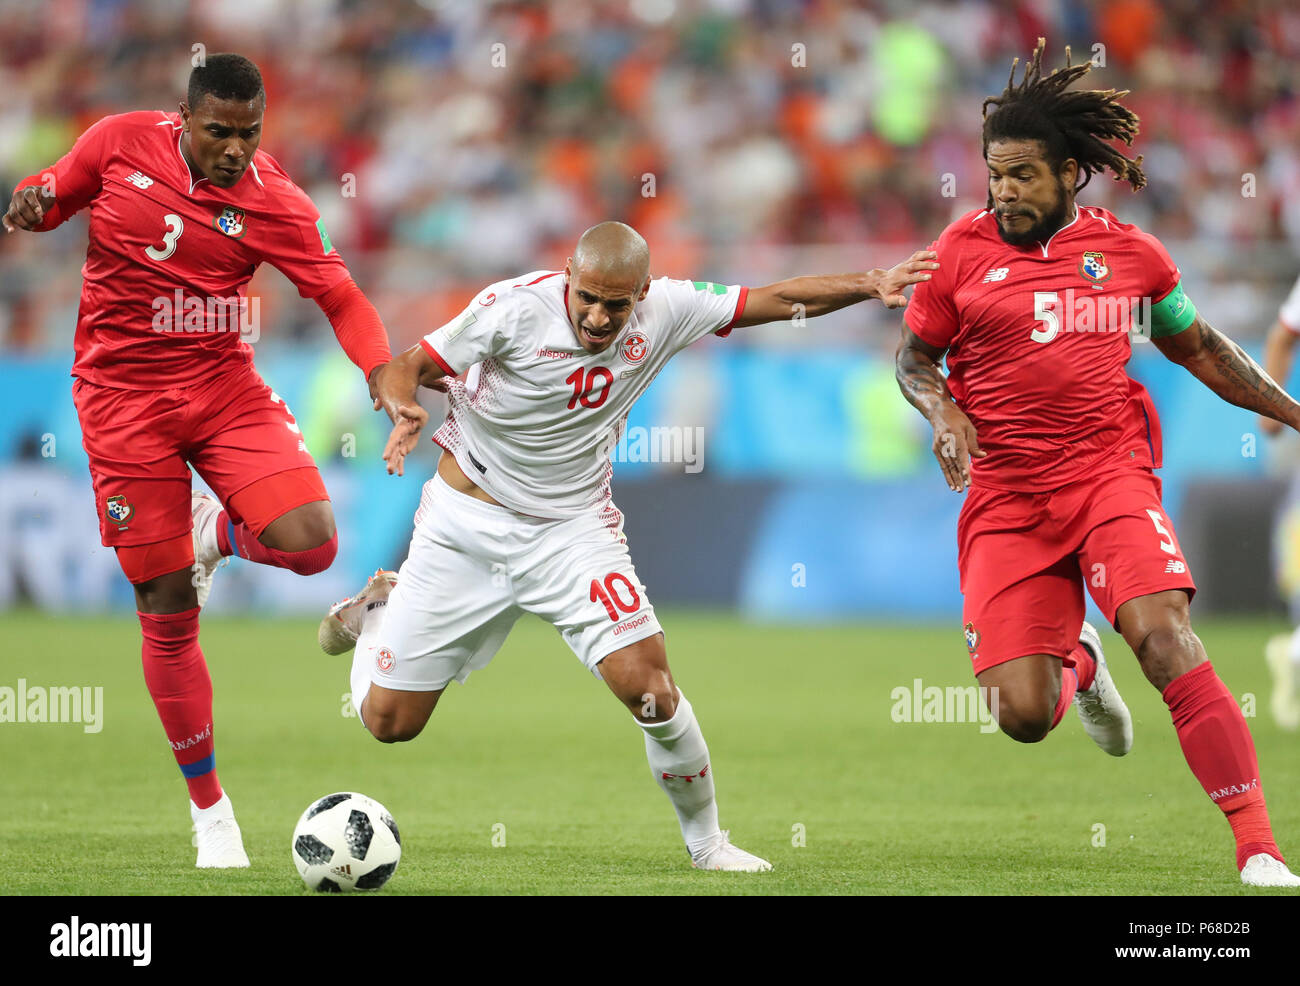 Saransk, Russia. 28th June, 2018. Panama's Harold Cummings (L) and Roman Torres in action against Tunisia's Wahbi Khazri (C) during the FIFA World Cup 2018 Group G soccer match between Tunisia and Panama at the Mordovia Arena, in Saransk, Russia, 28 June 2018. Credit: Mokhtar Hmima/dpa/Alamy Live News Stock Photo